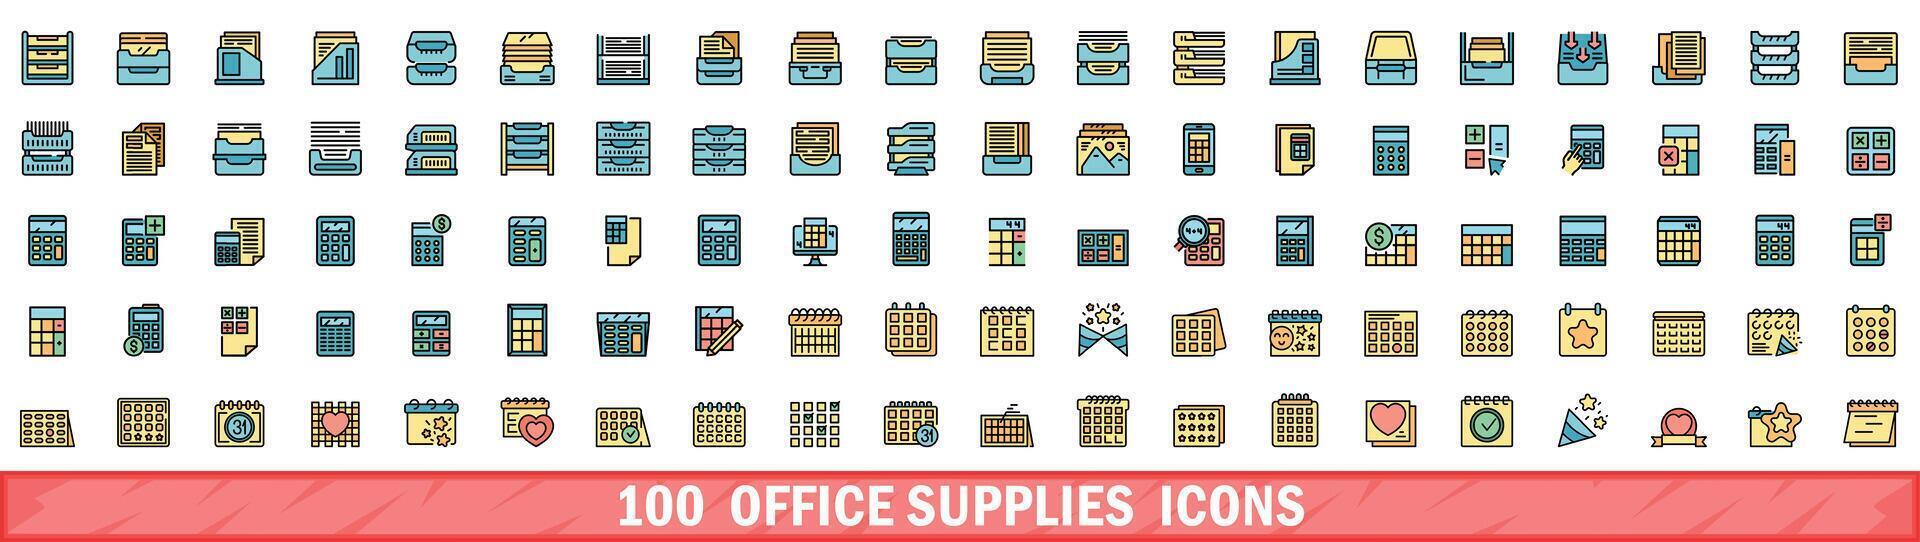 100 office supplies icons set, color line style vector